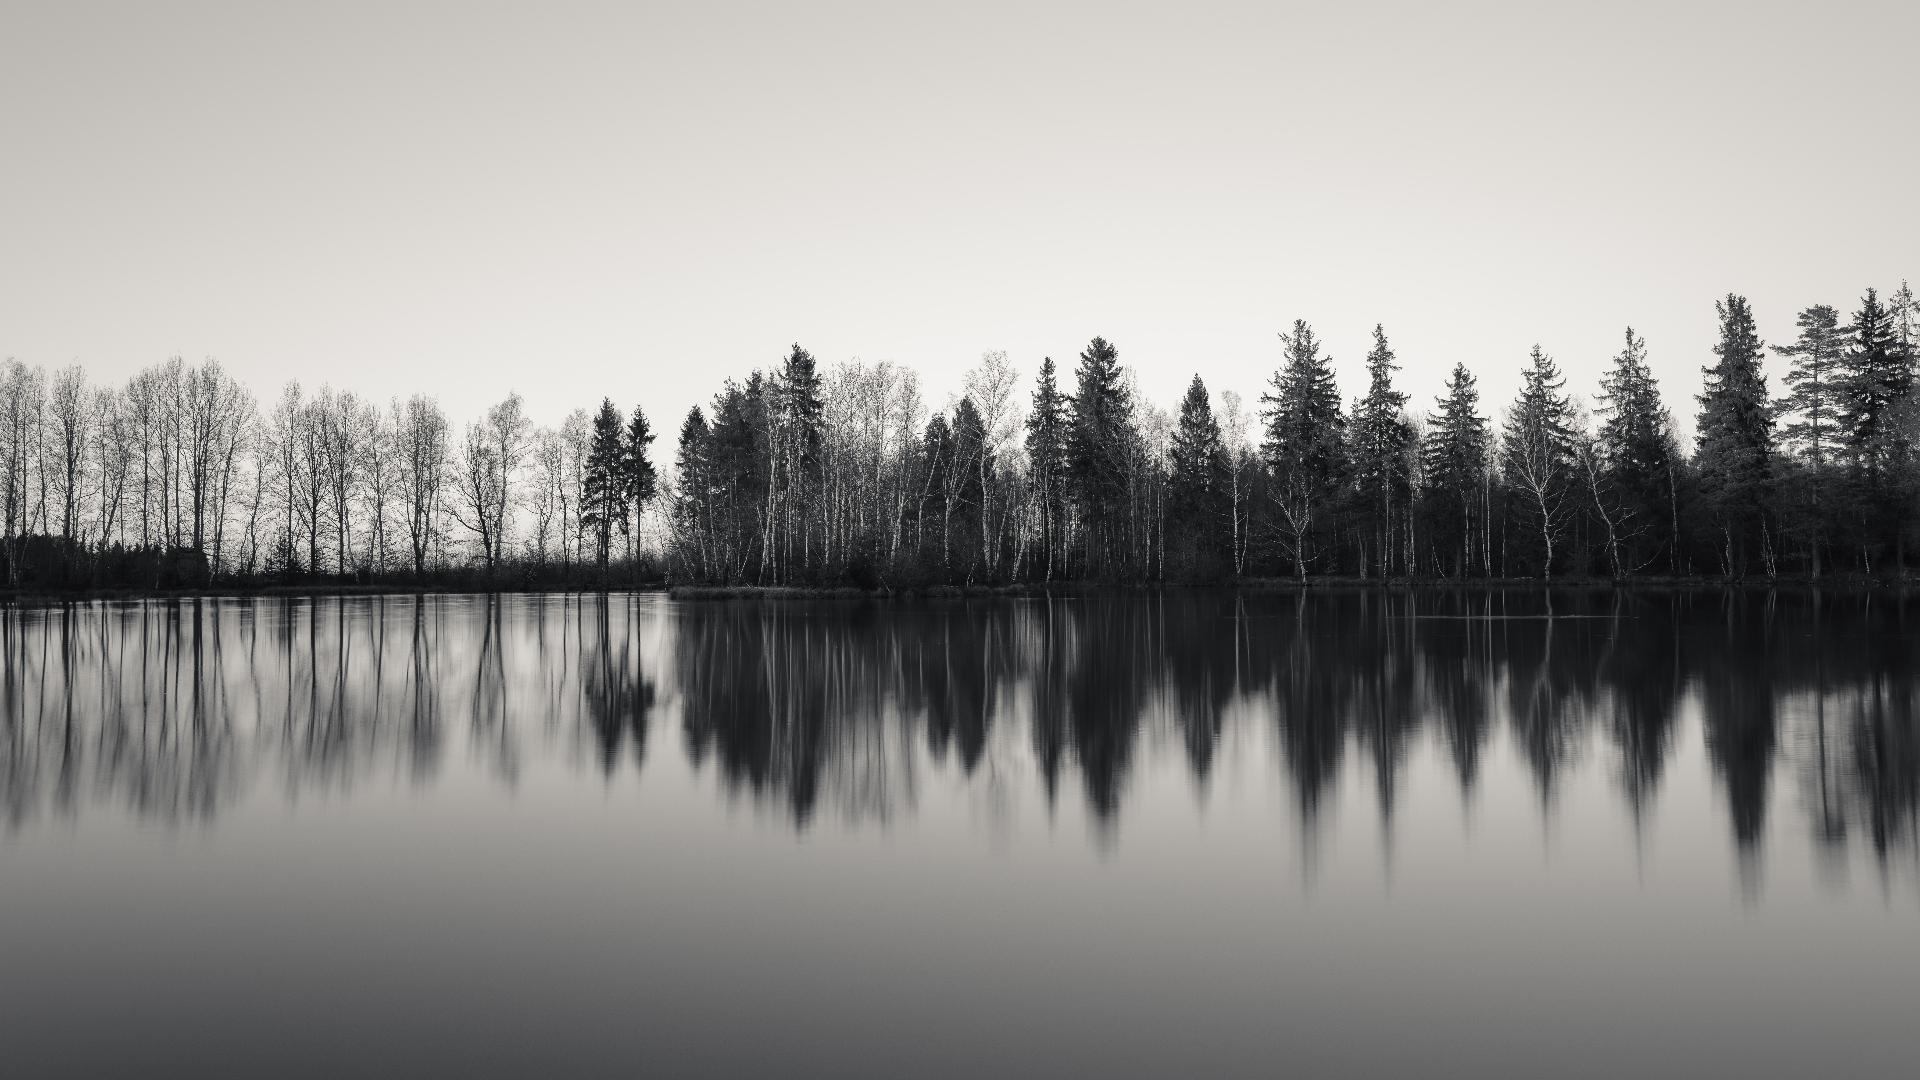 General 1920x1080 nature landscape trees water sky monochrome Germany lake